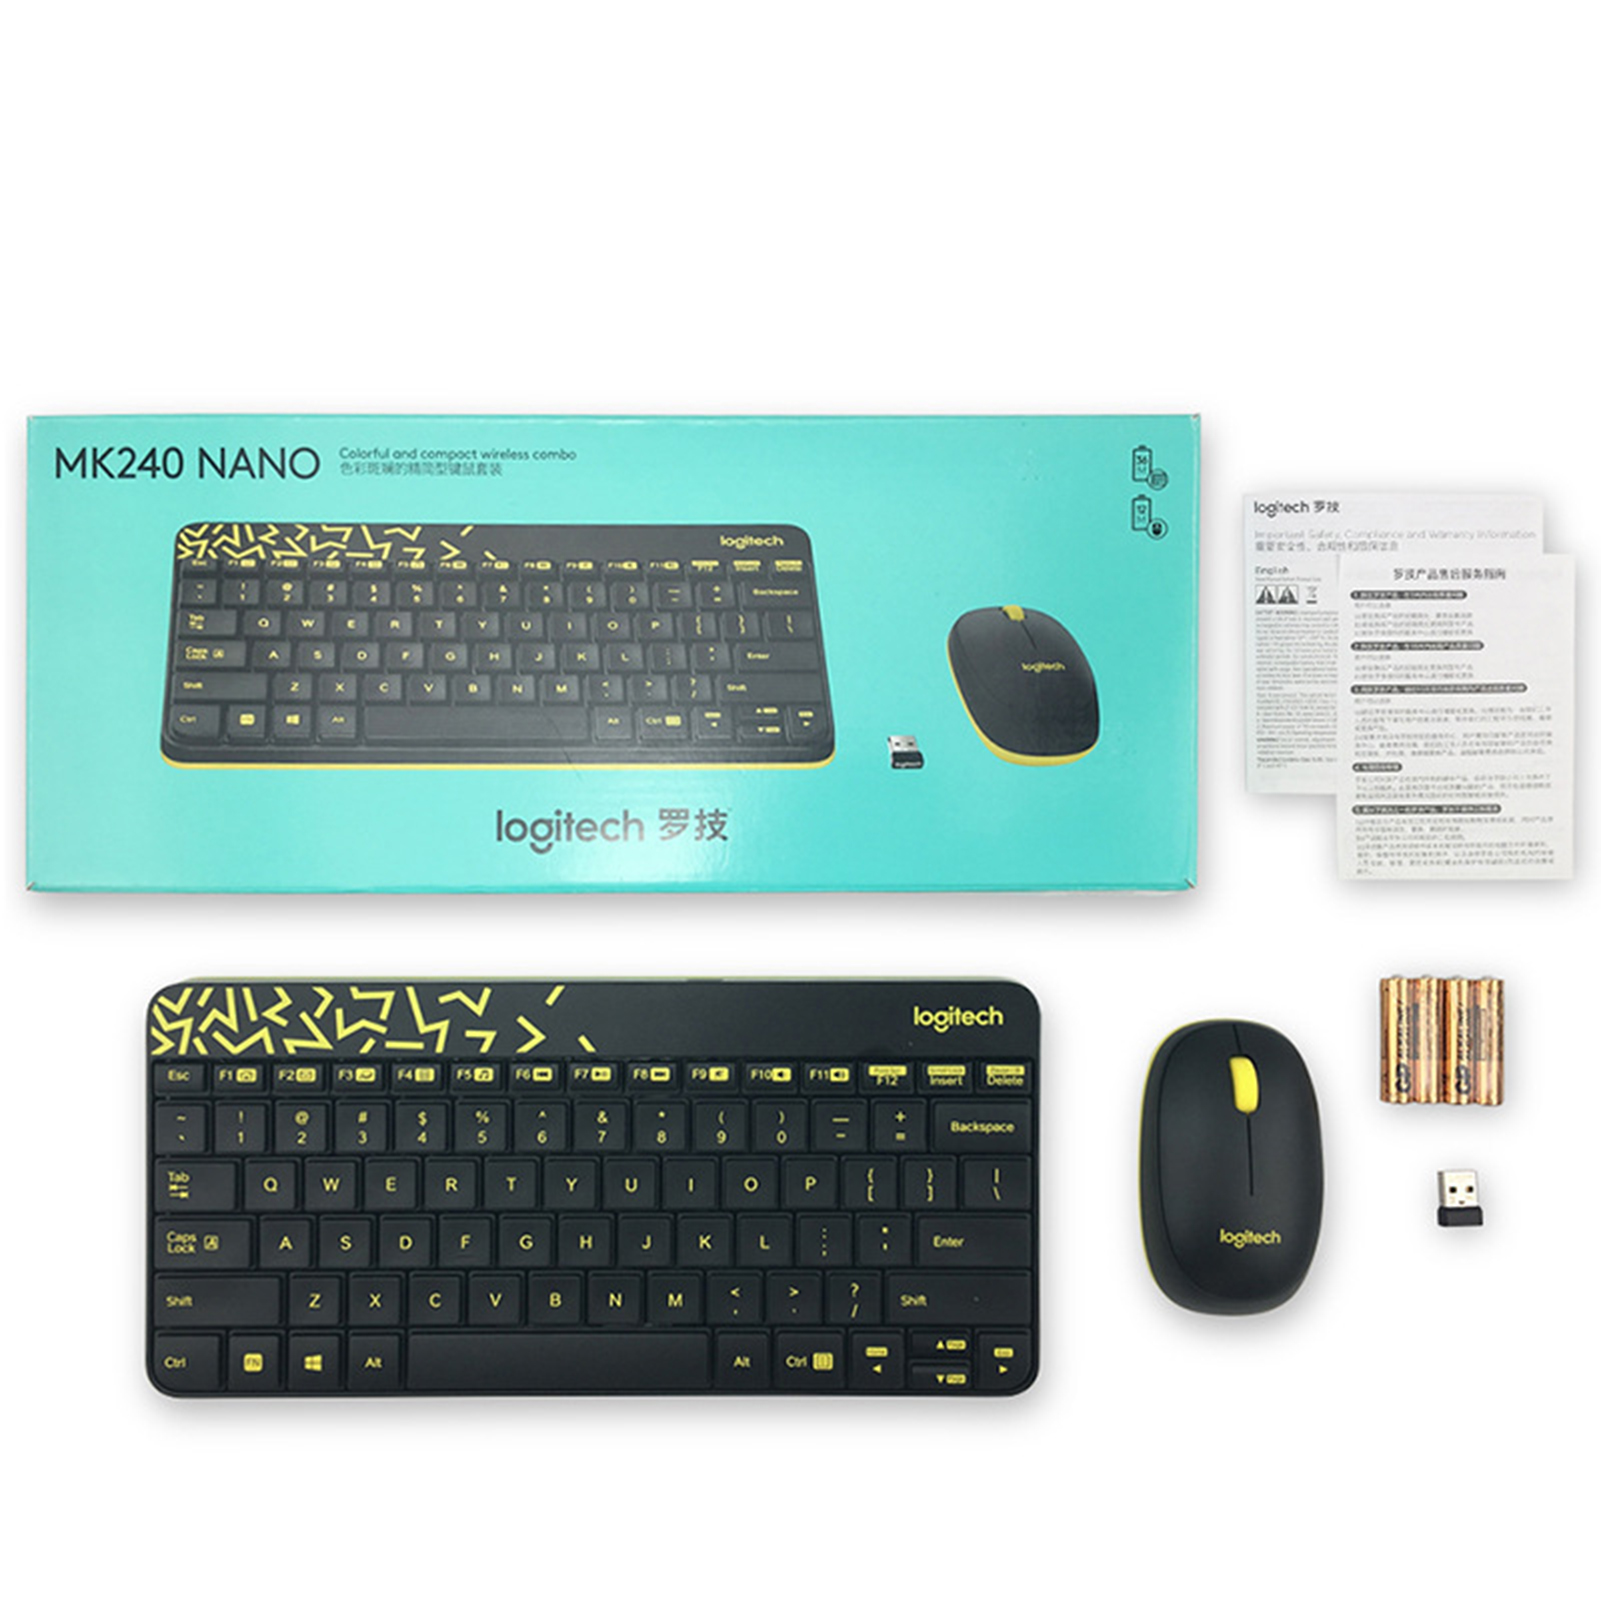 Logitech MK240 Nano Wireless Keyboard and Mouse Combo for Desktop Laptop Computer Home Office Using (White)